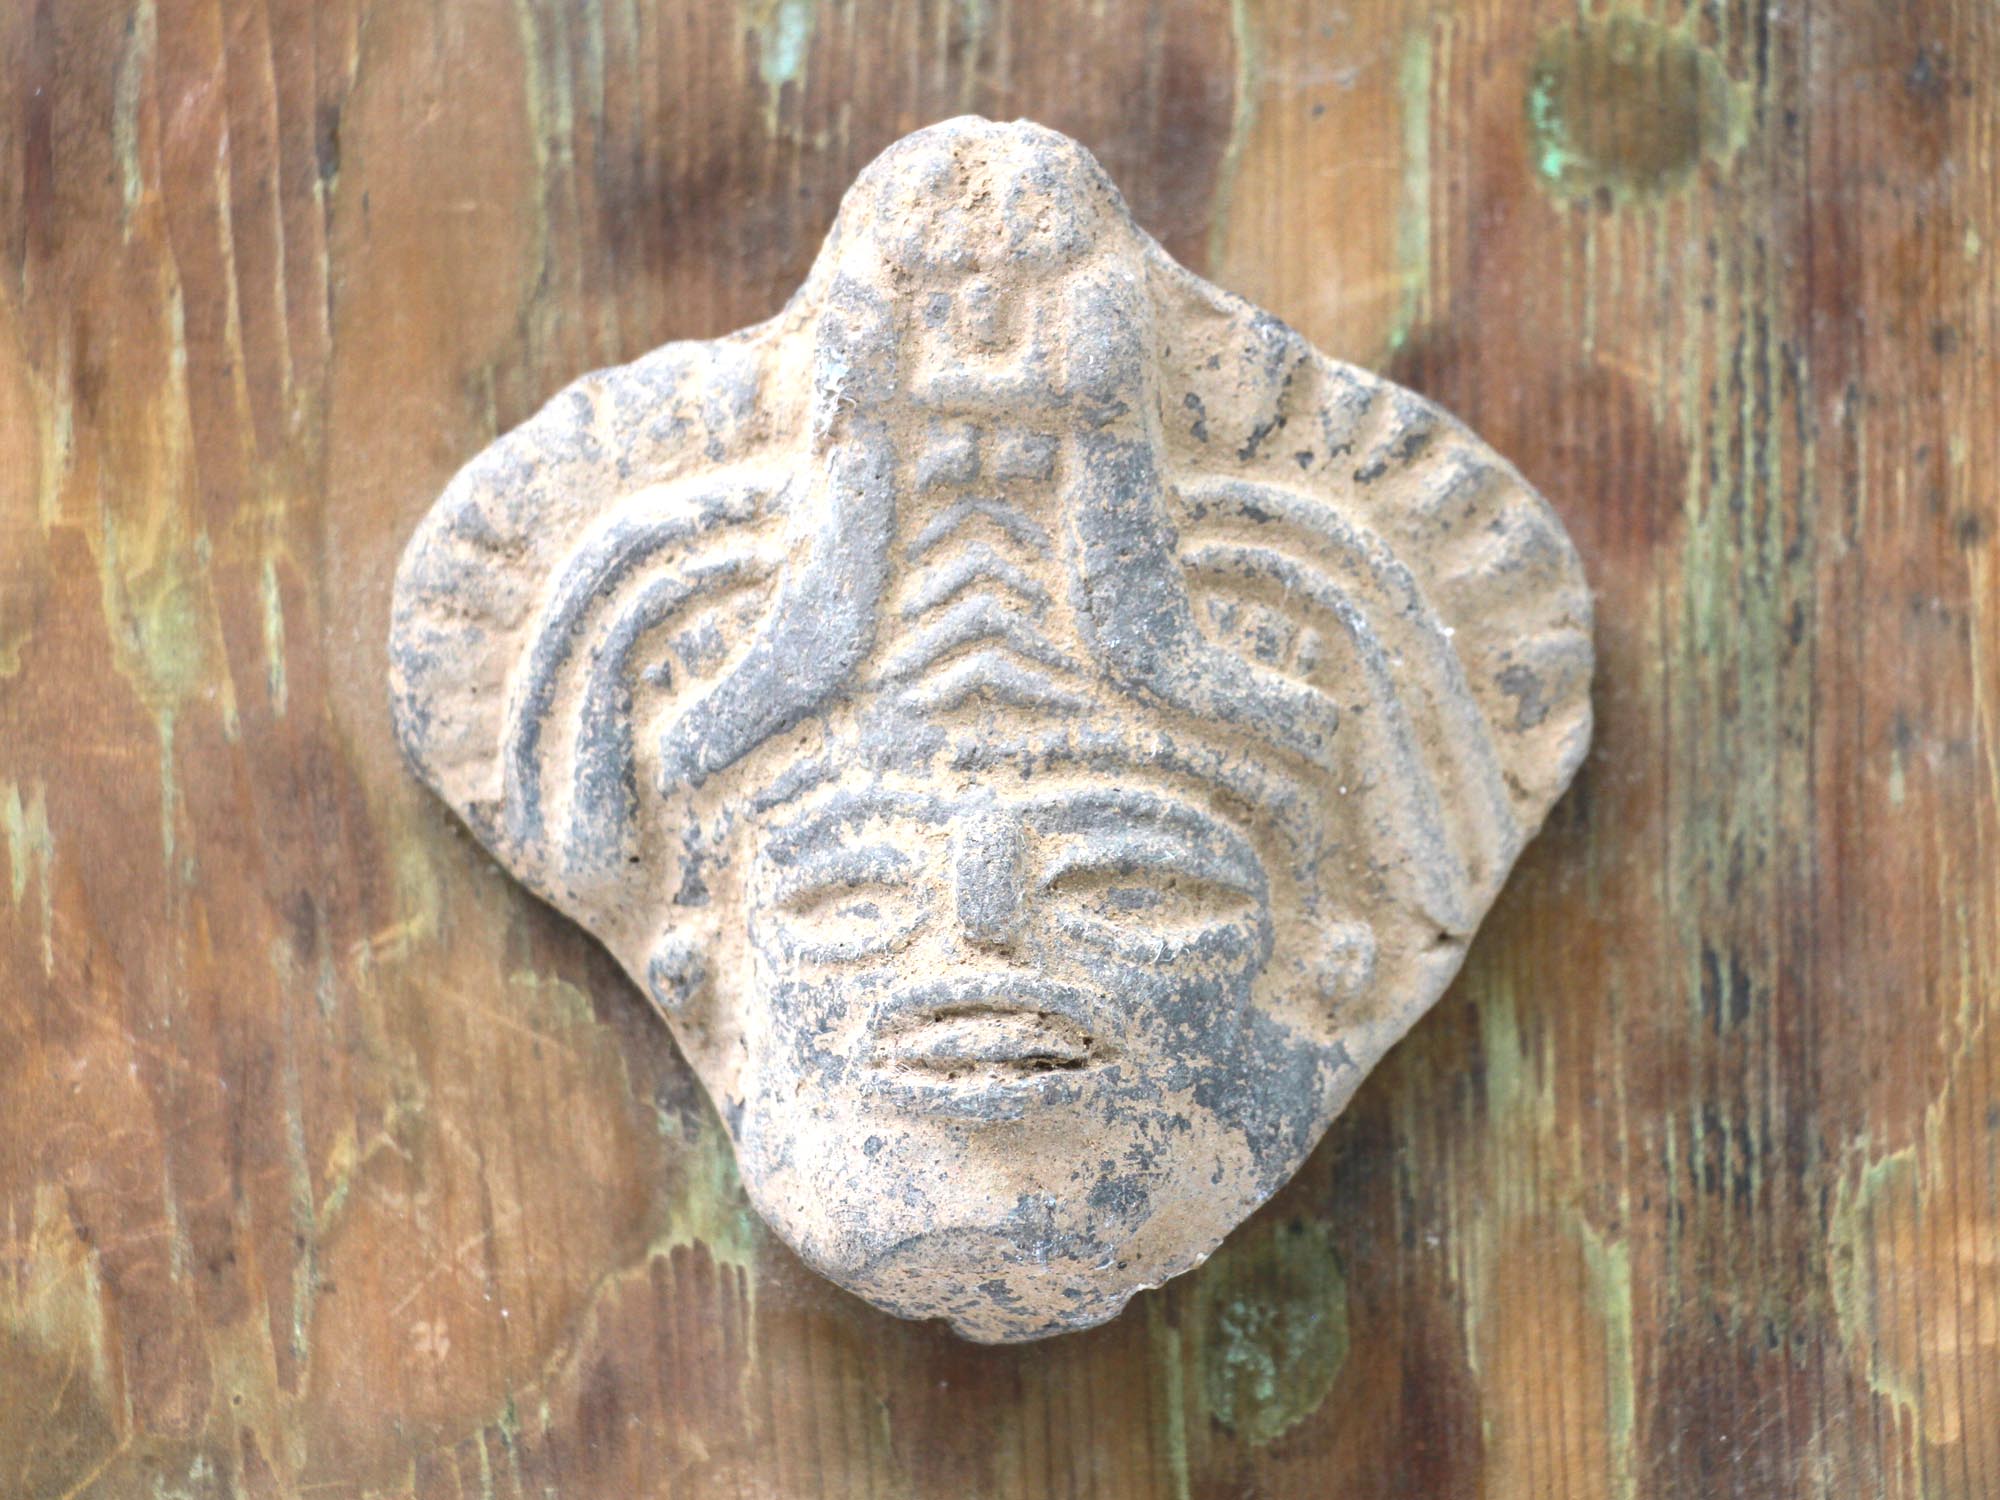 ANCIENT TEOTIHUACAN MEXICO CARVED STONE ARTIFACT PIC-1